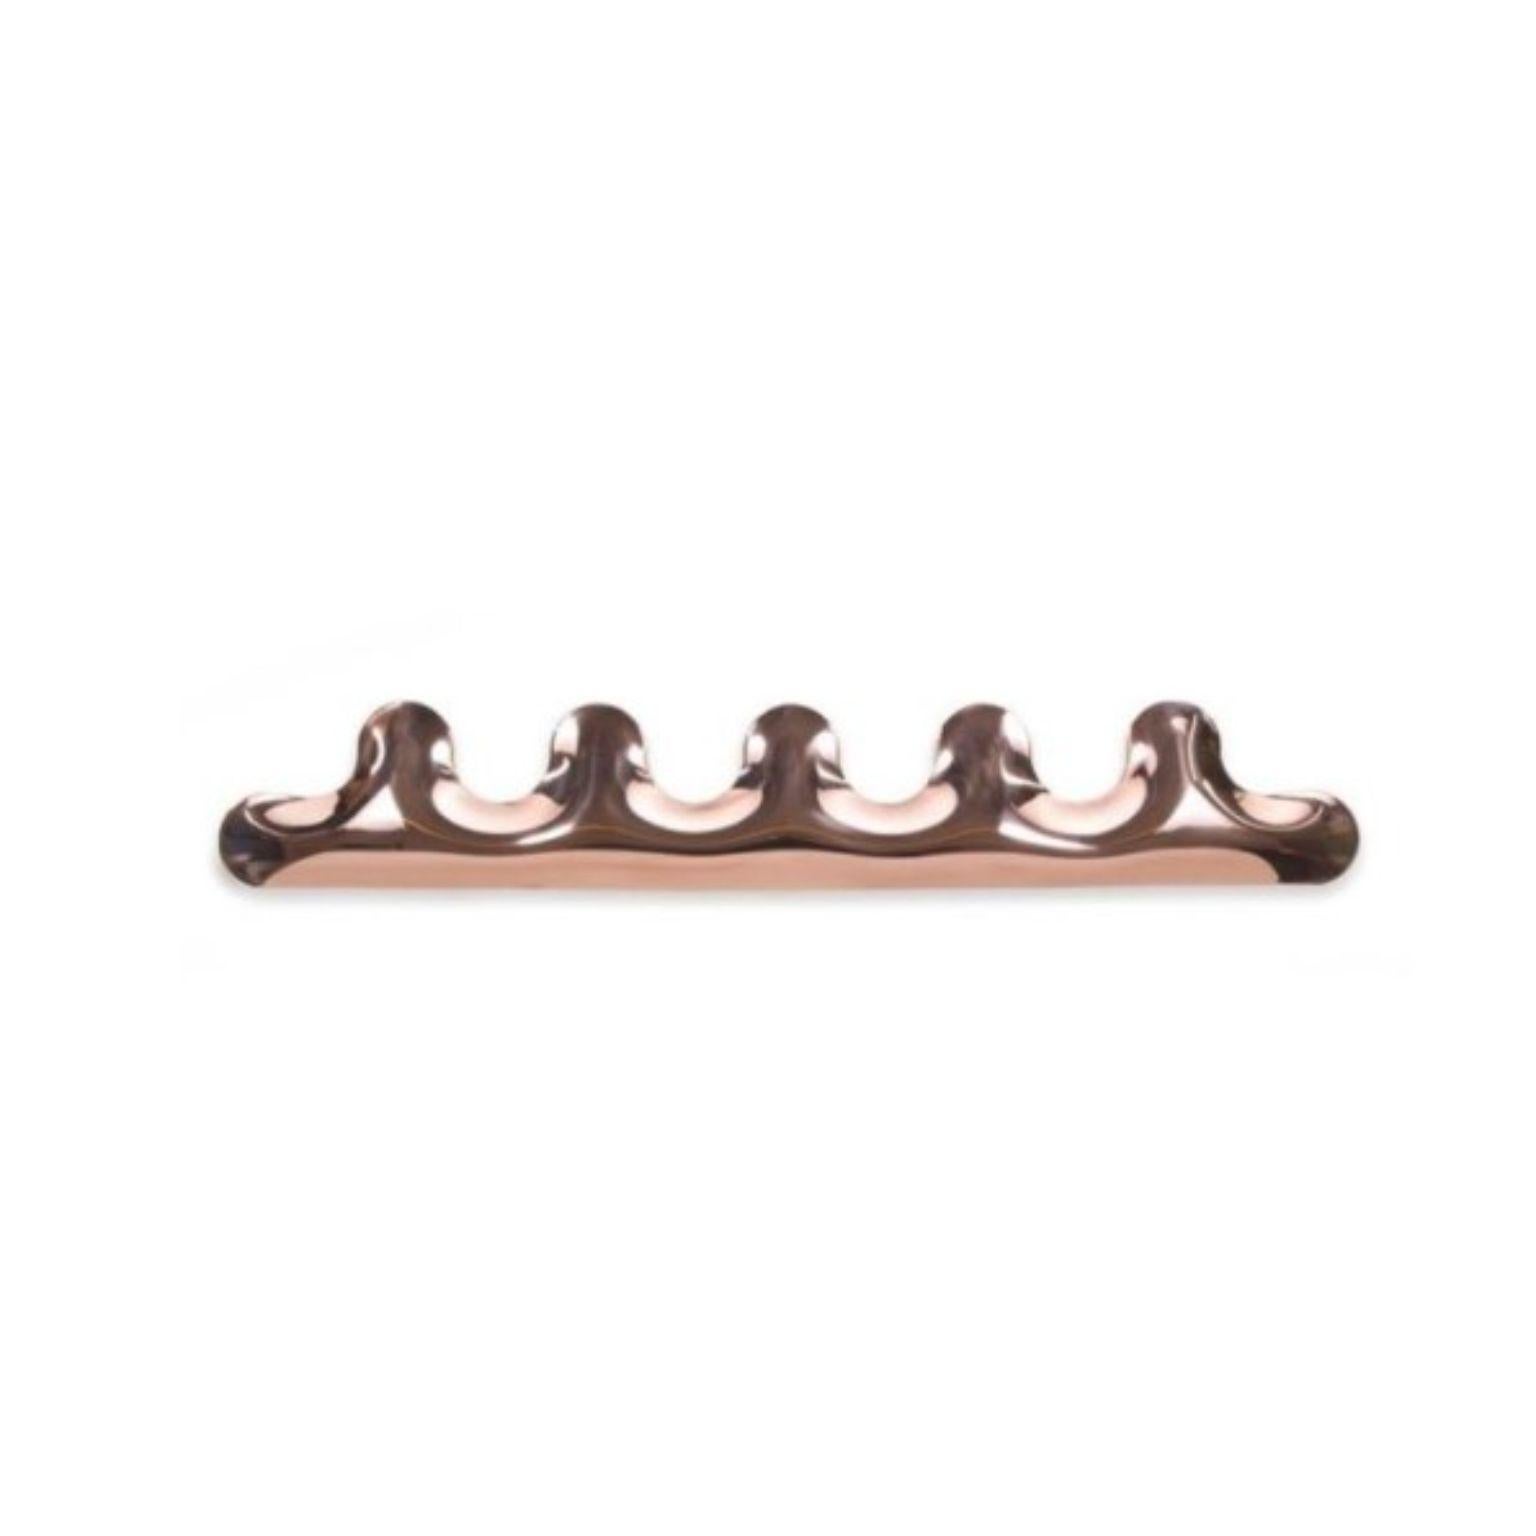 Copper Polished Kamm 5 coat hanger by Zieta
Dimensions: D 6 x W 77 x H 13 cm 
Material: Copper.
Finish: Polished.
Available in colors: Beige Grey, Black Glossy, Graphite, Stainless Steel, White Glossy, Flamed Gold, and Cosmic Blue. Also available in